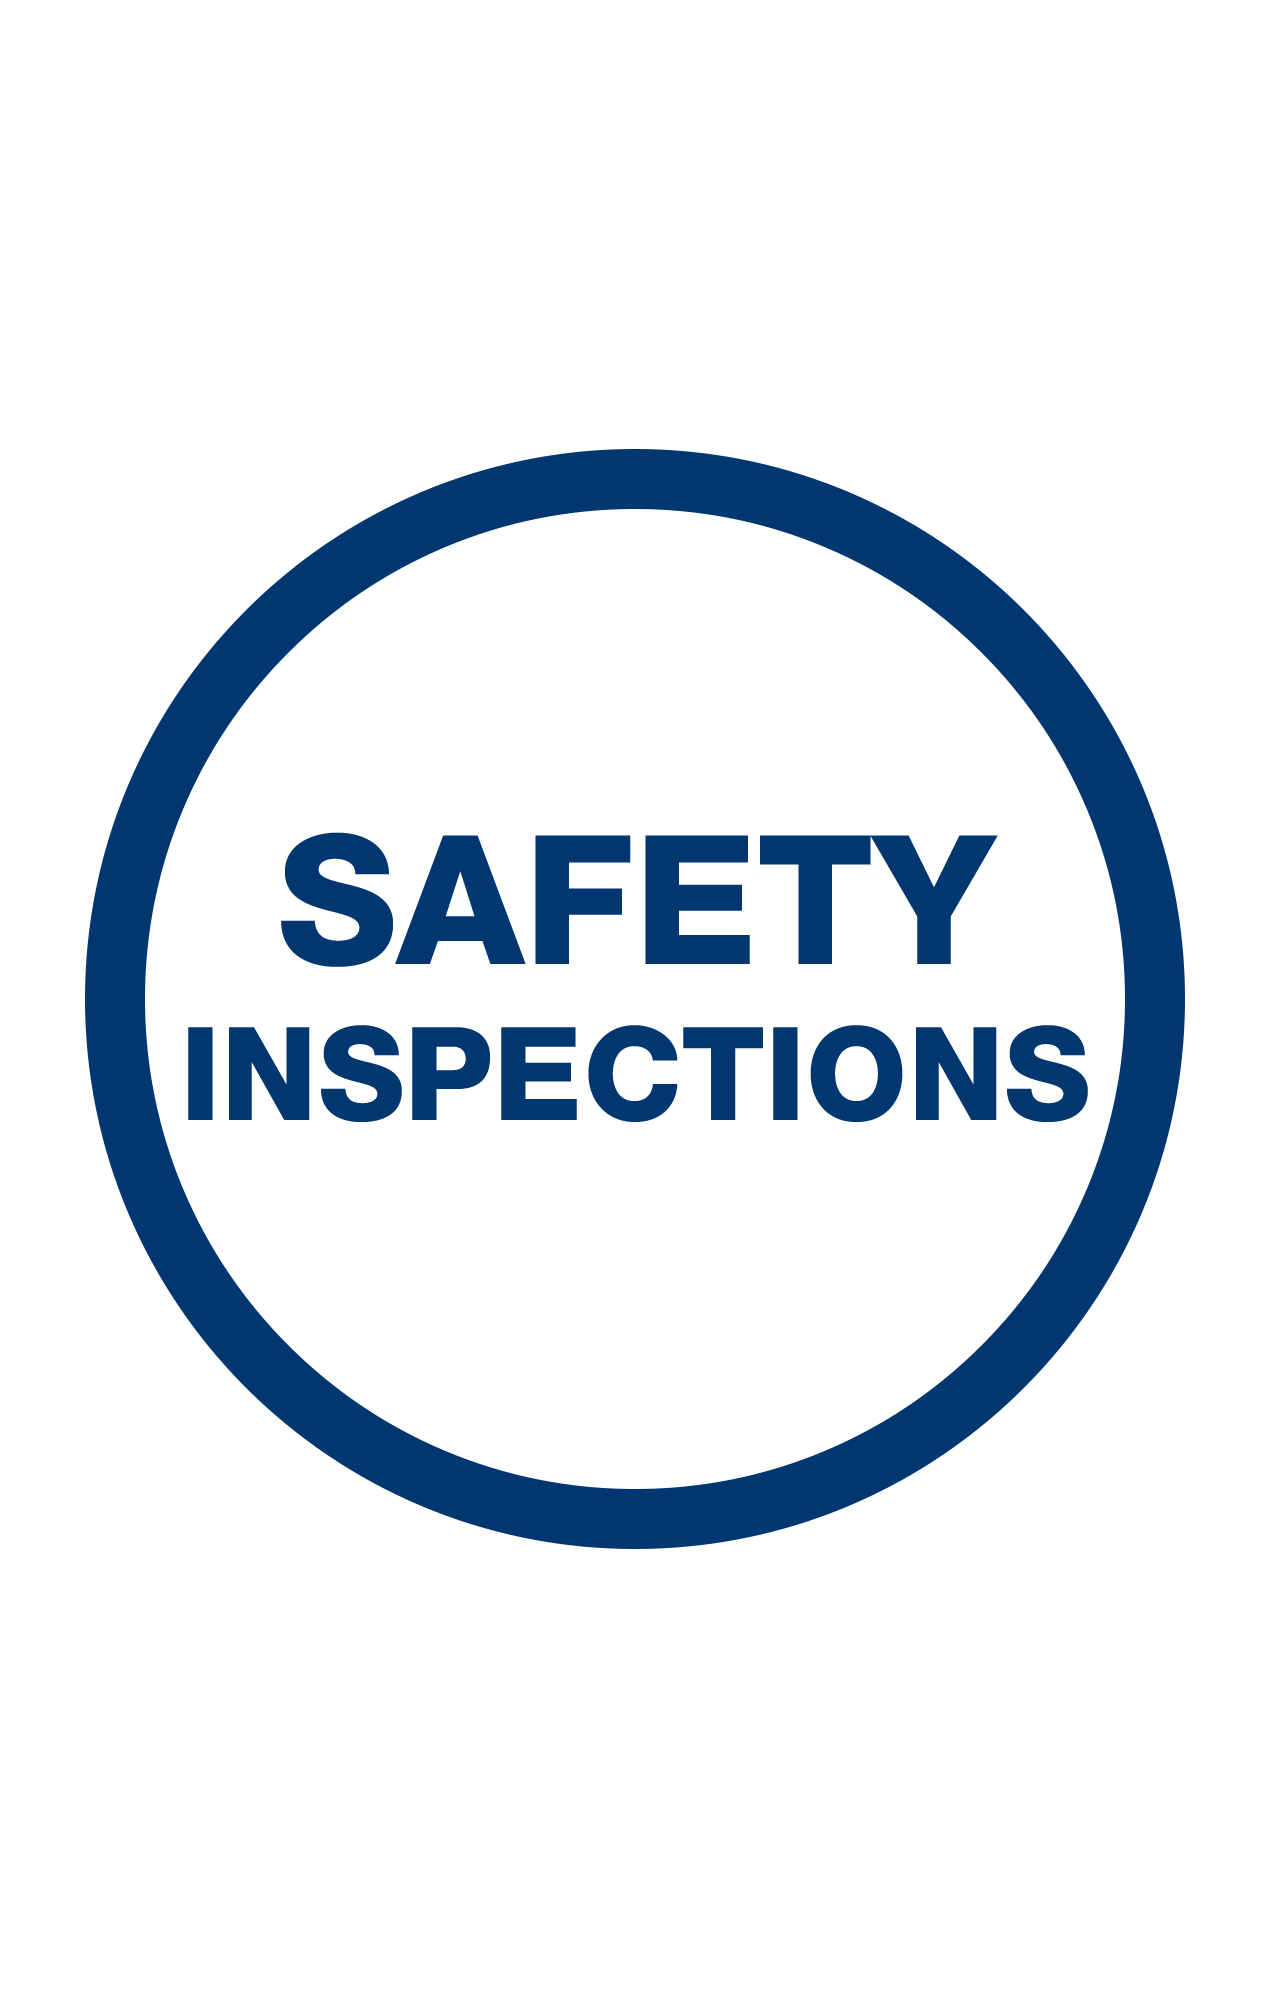 Safety-inspections-2.png